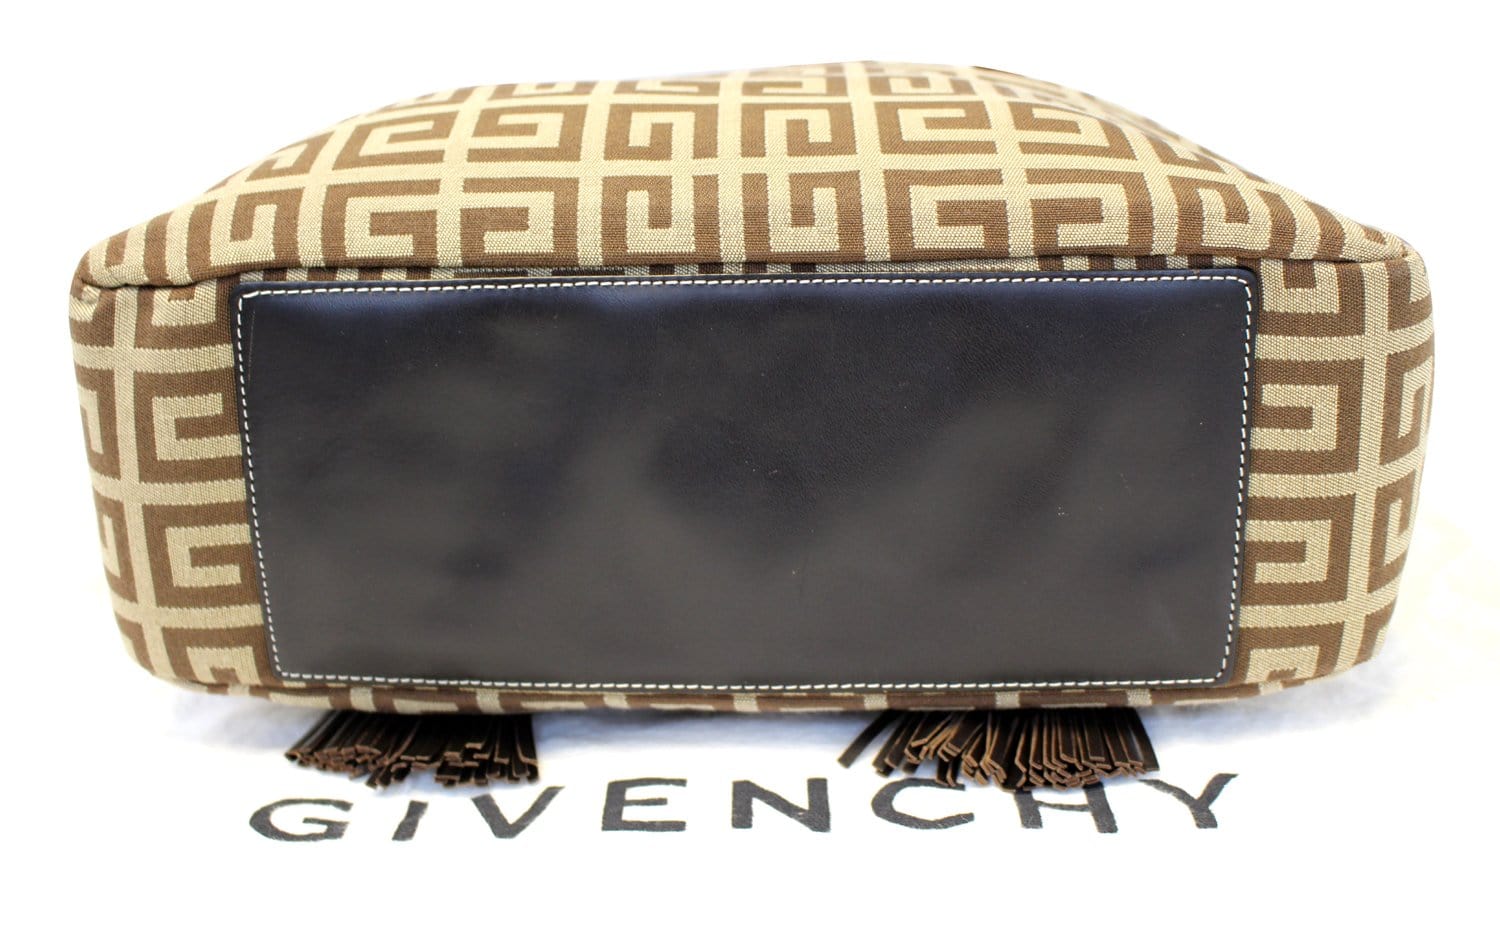 Vintage Givenchy travel duffle bag in classic monogram jacquard